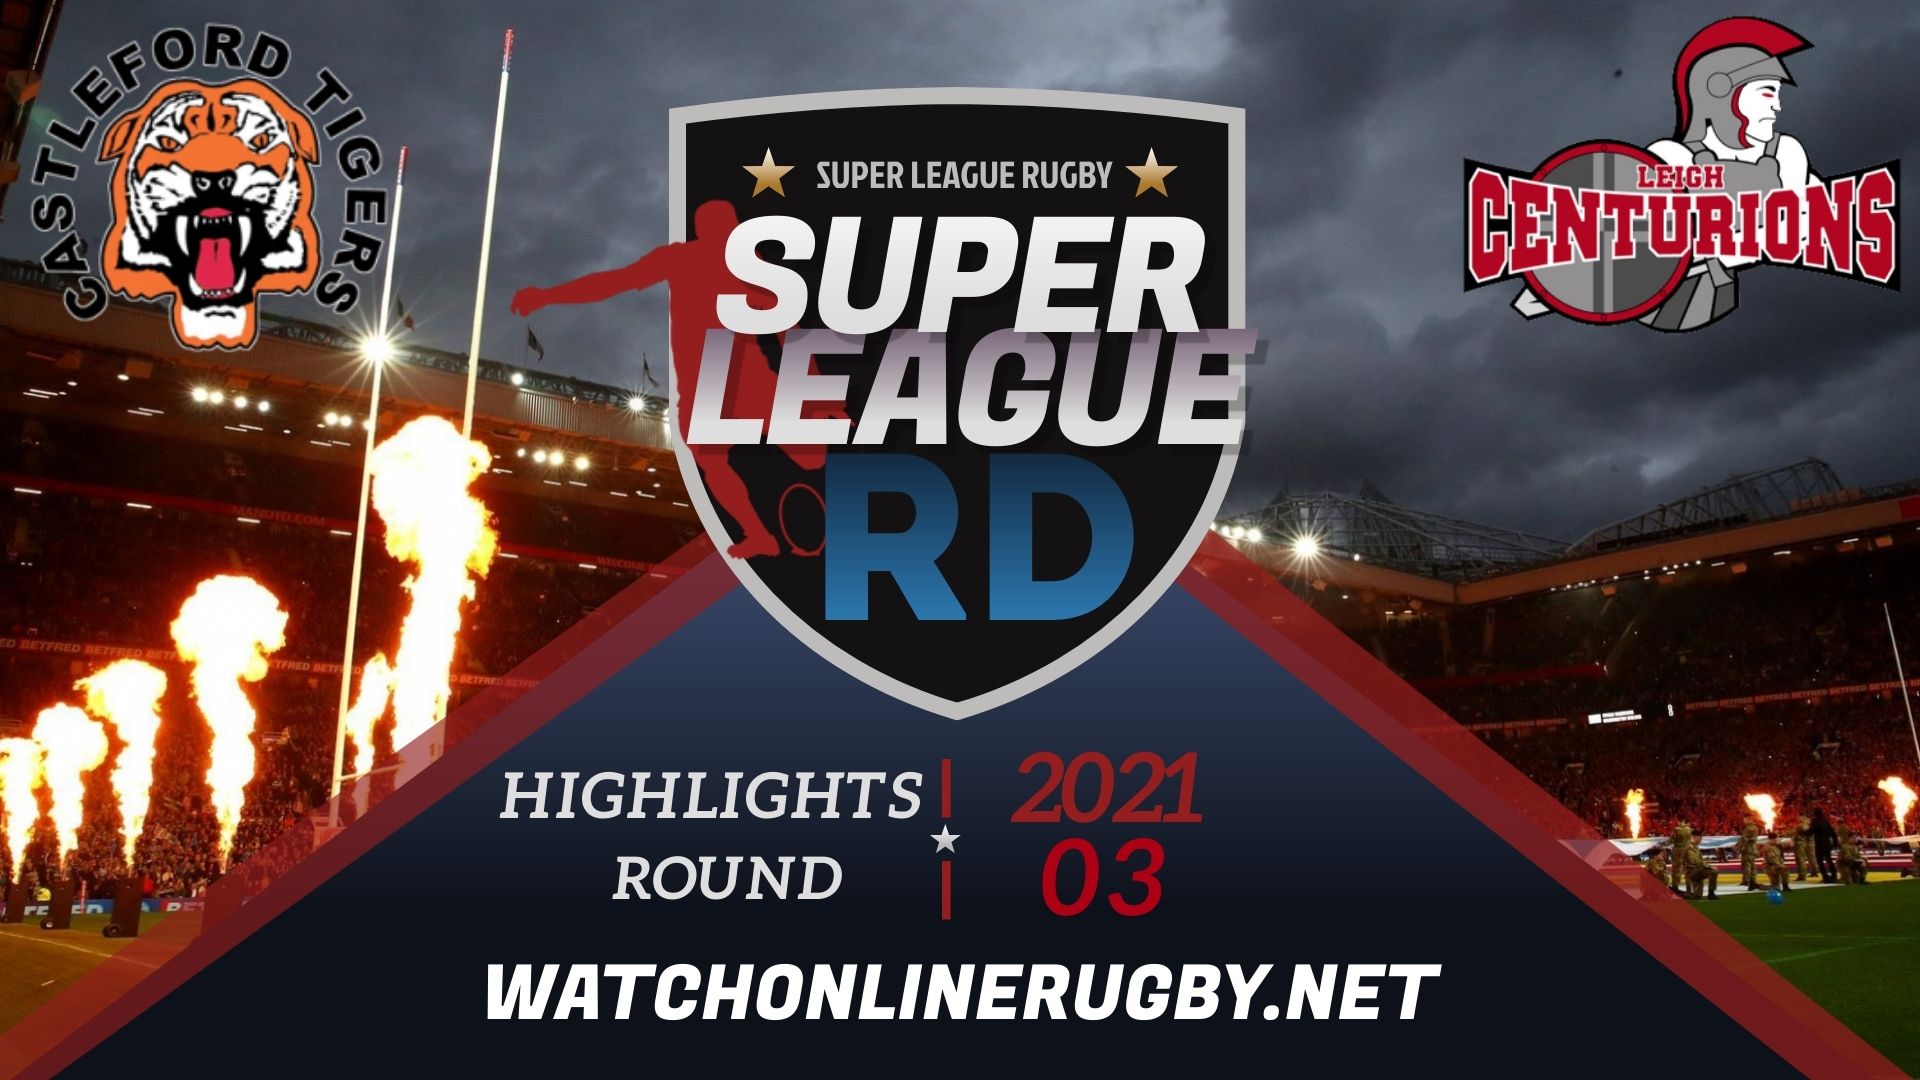 Castleford Tigers Vs Leigh Centurions Super League Rugby 2021 RD 3